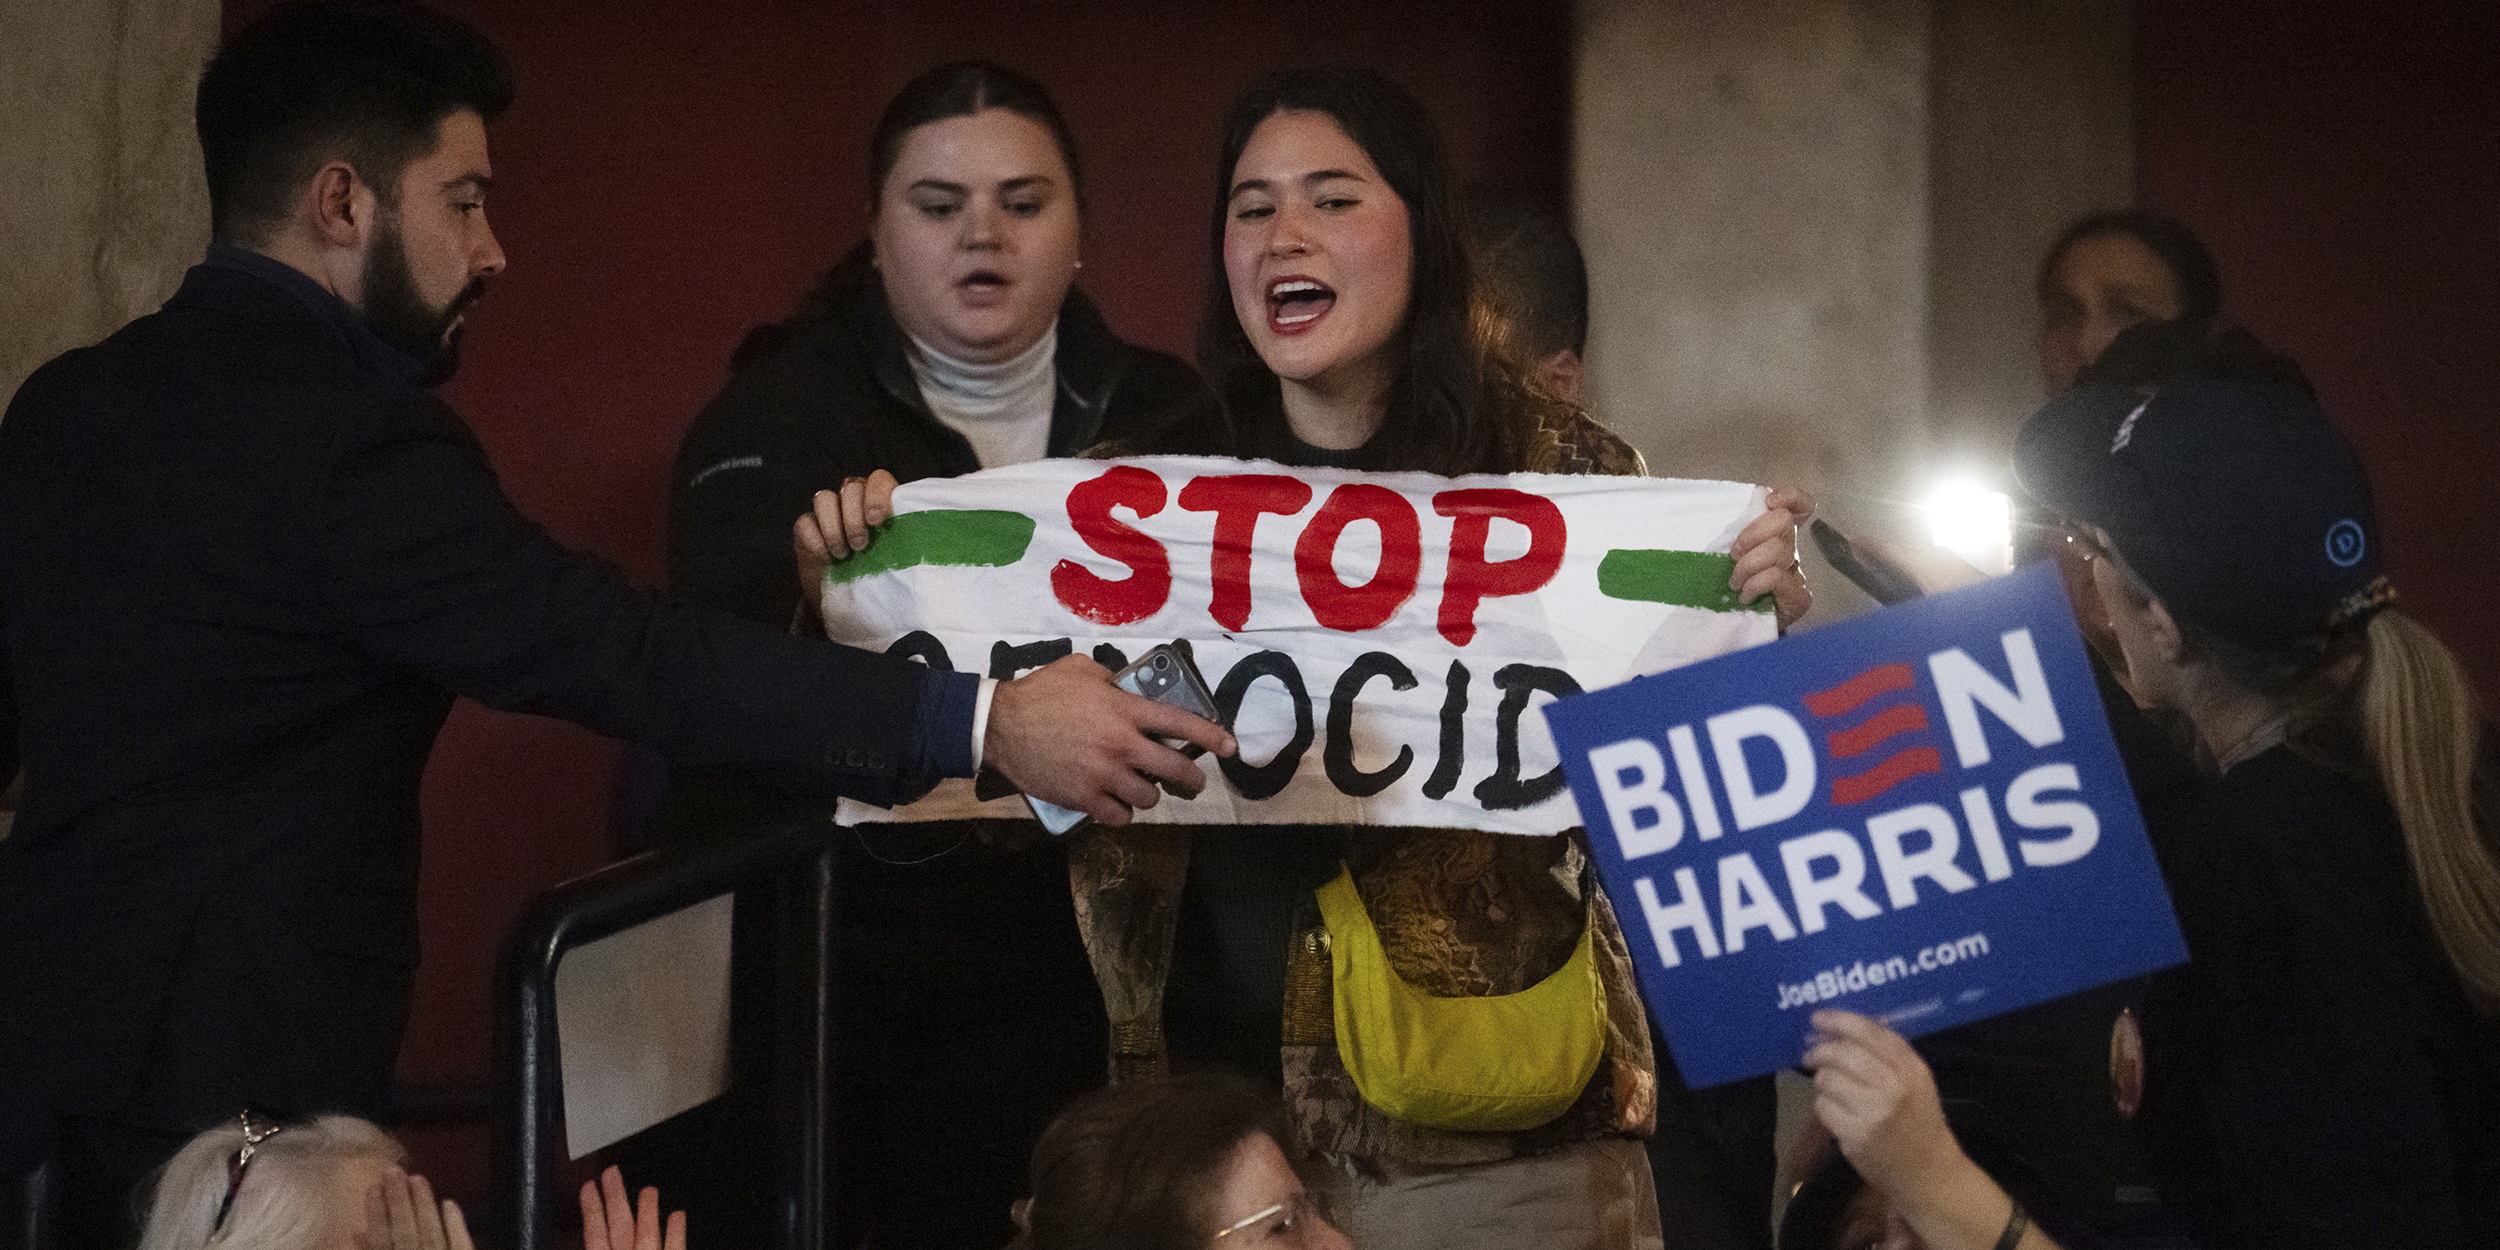 A pro-Palestinian demonstrator interrupts President Joe Biden's remarks during a campaign event in support of abortion rights at George Mason University in Manassas, VA., on Tuesday, January 23, 2024. (Photo by Craig Hudson/Sipa USA)(Sipa via AP Images)